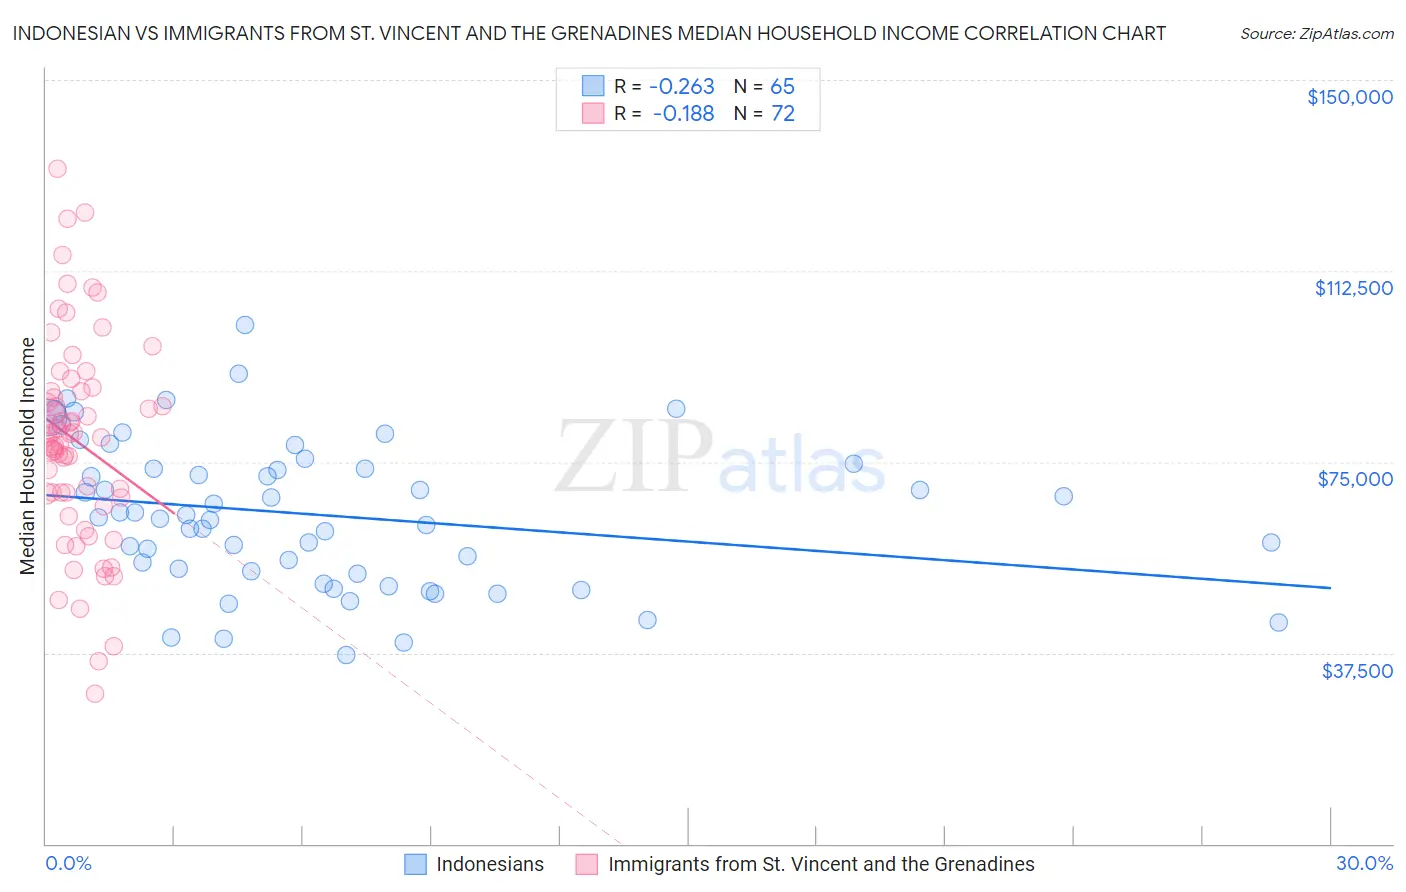 Indonesian vs Immigrants from St. Vincent and the Grenadines Median Household Income